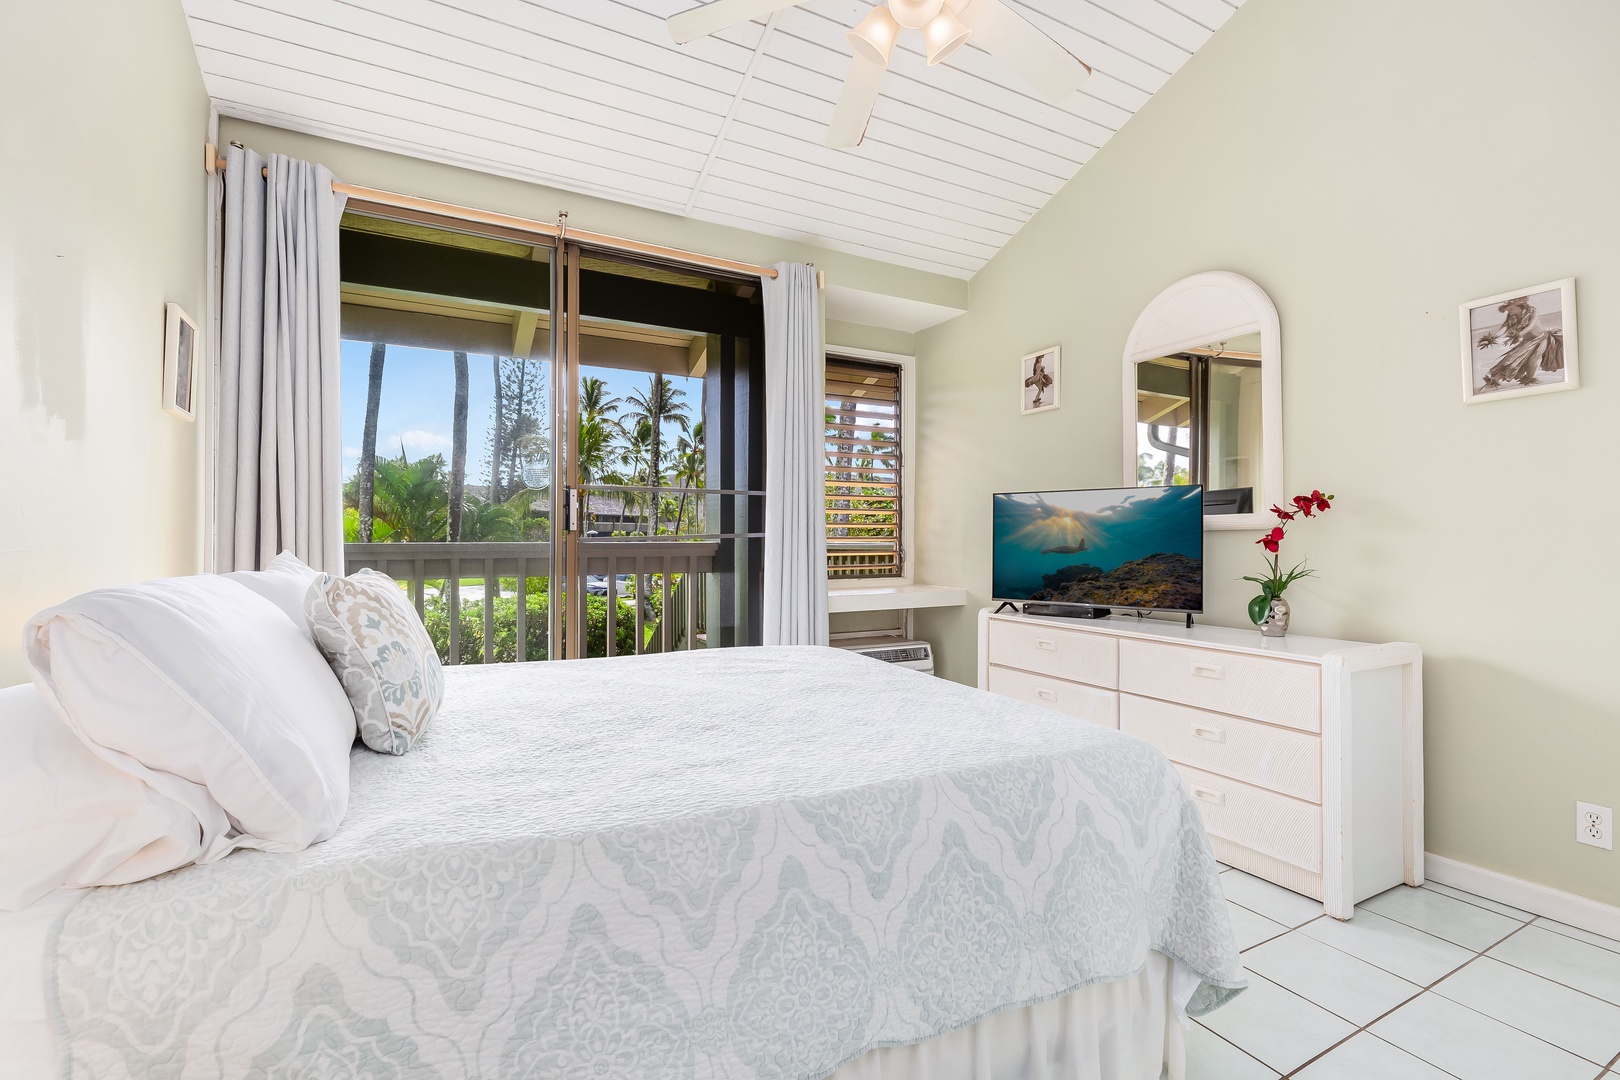 Kahuku Vacation Rentals, Ilima West Kuilima Estates #18 at Turtle Bay - Welcome to the main bedroom where simplicity meets comfort for a rejuvenating rest.